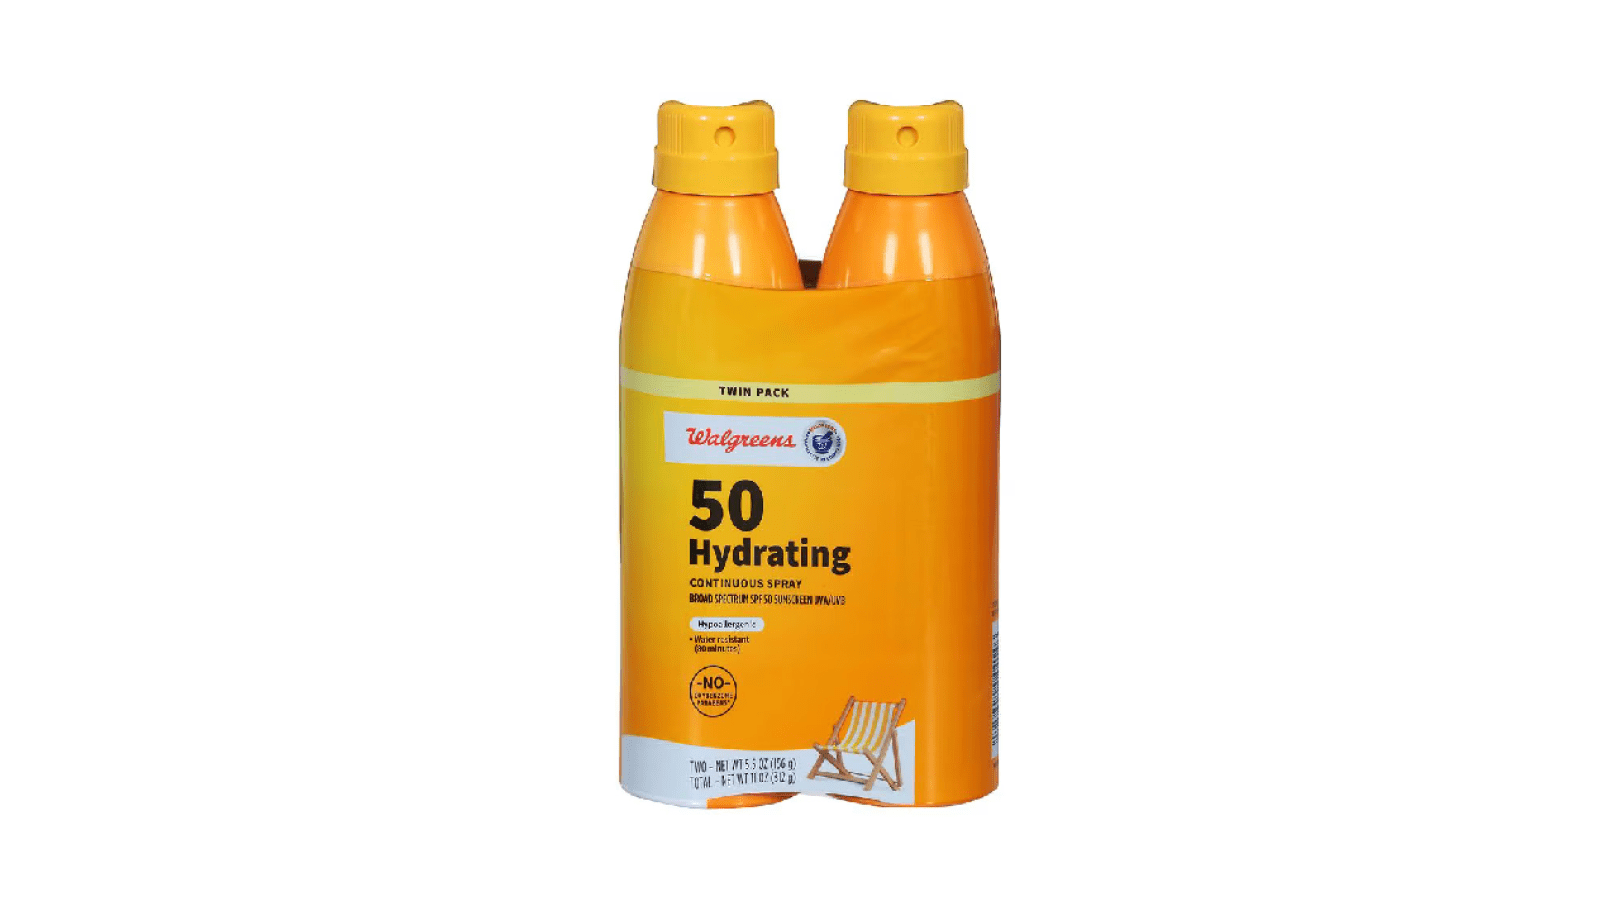 SPF 50 Hydrating Continuous Spray Sunscreen 